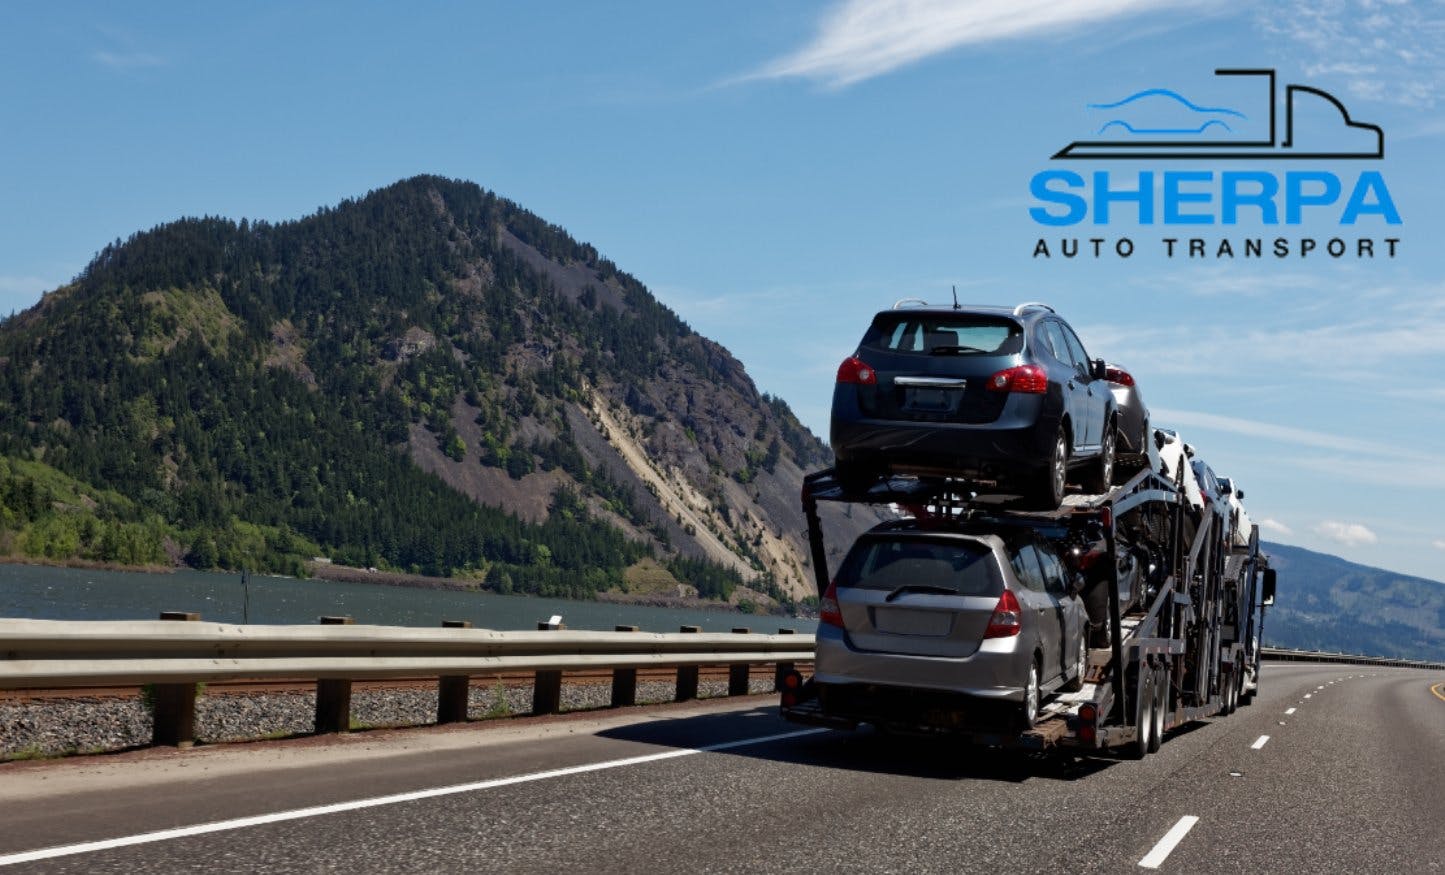 Sherpa Auto Transport Review: One Price, Vehicle Shipped!